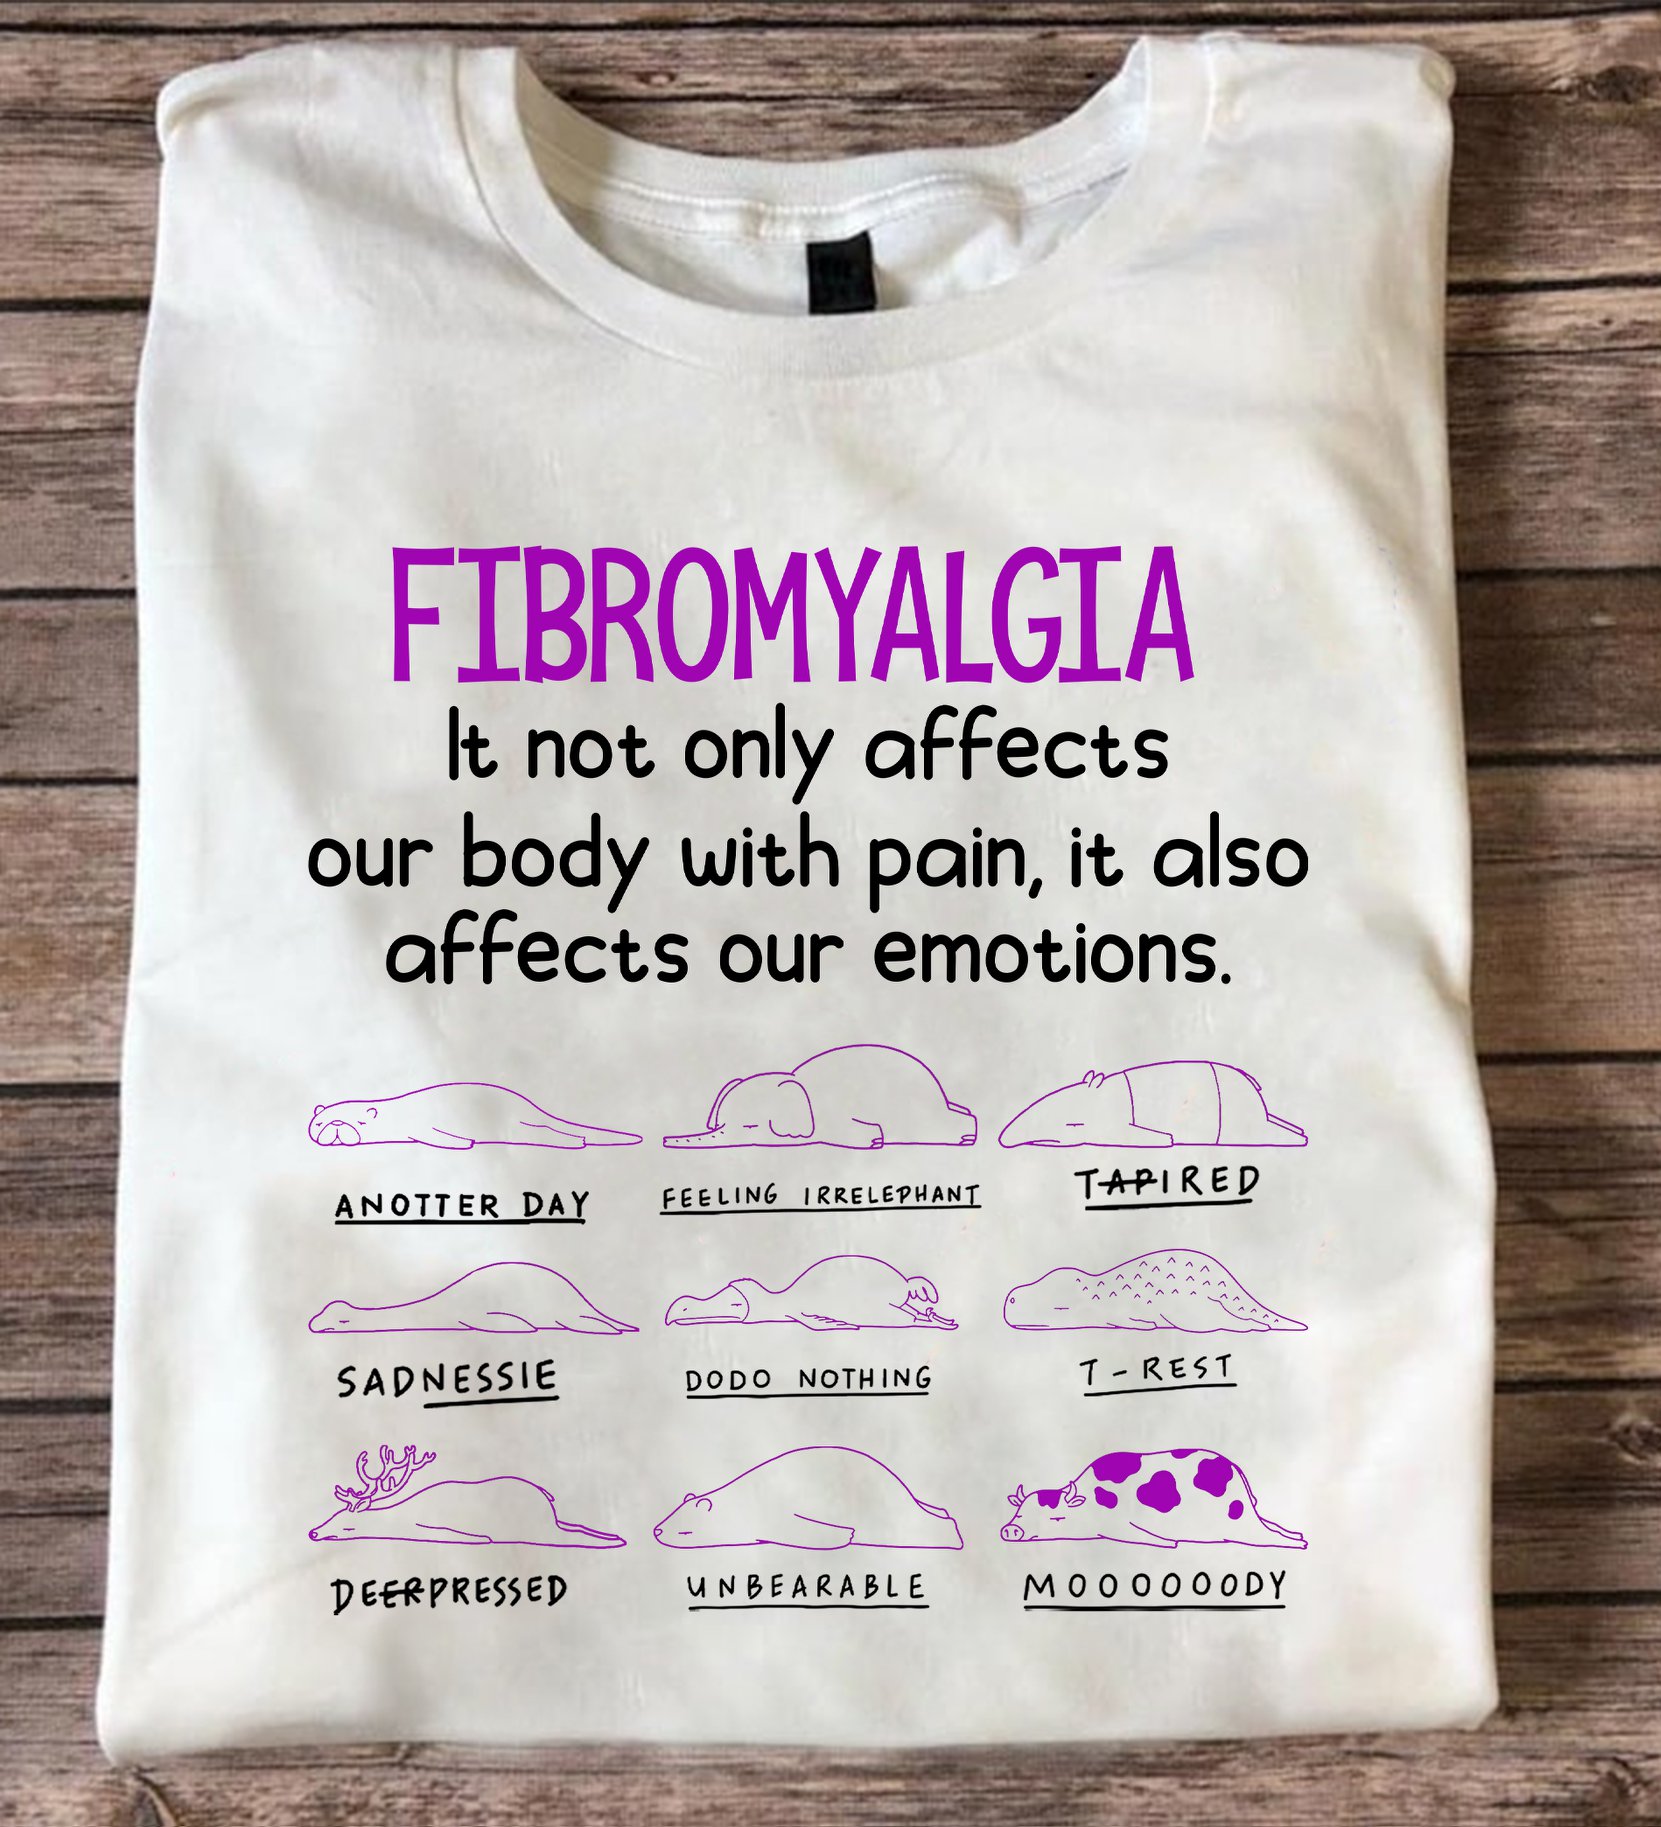 Fibromyalgia it not only affects our body with pain, it also affects our emotions